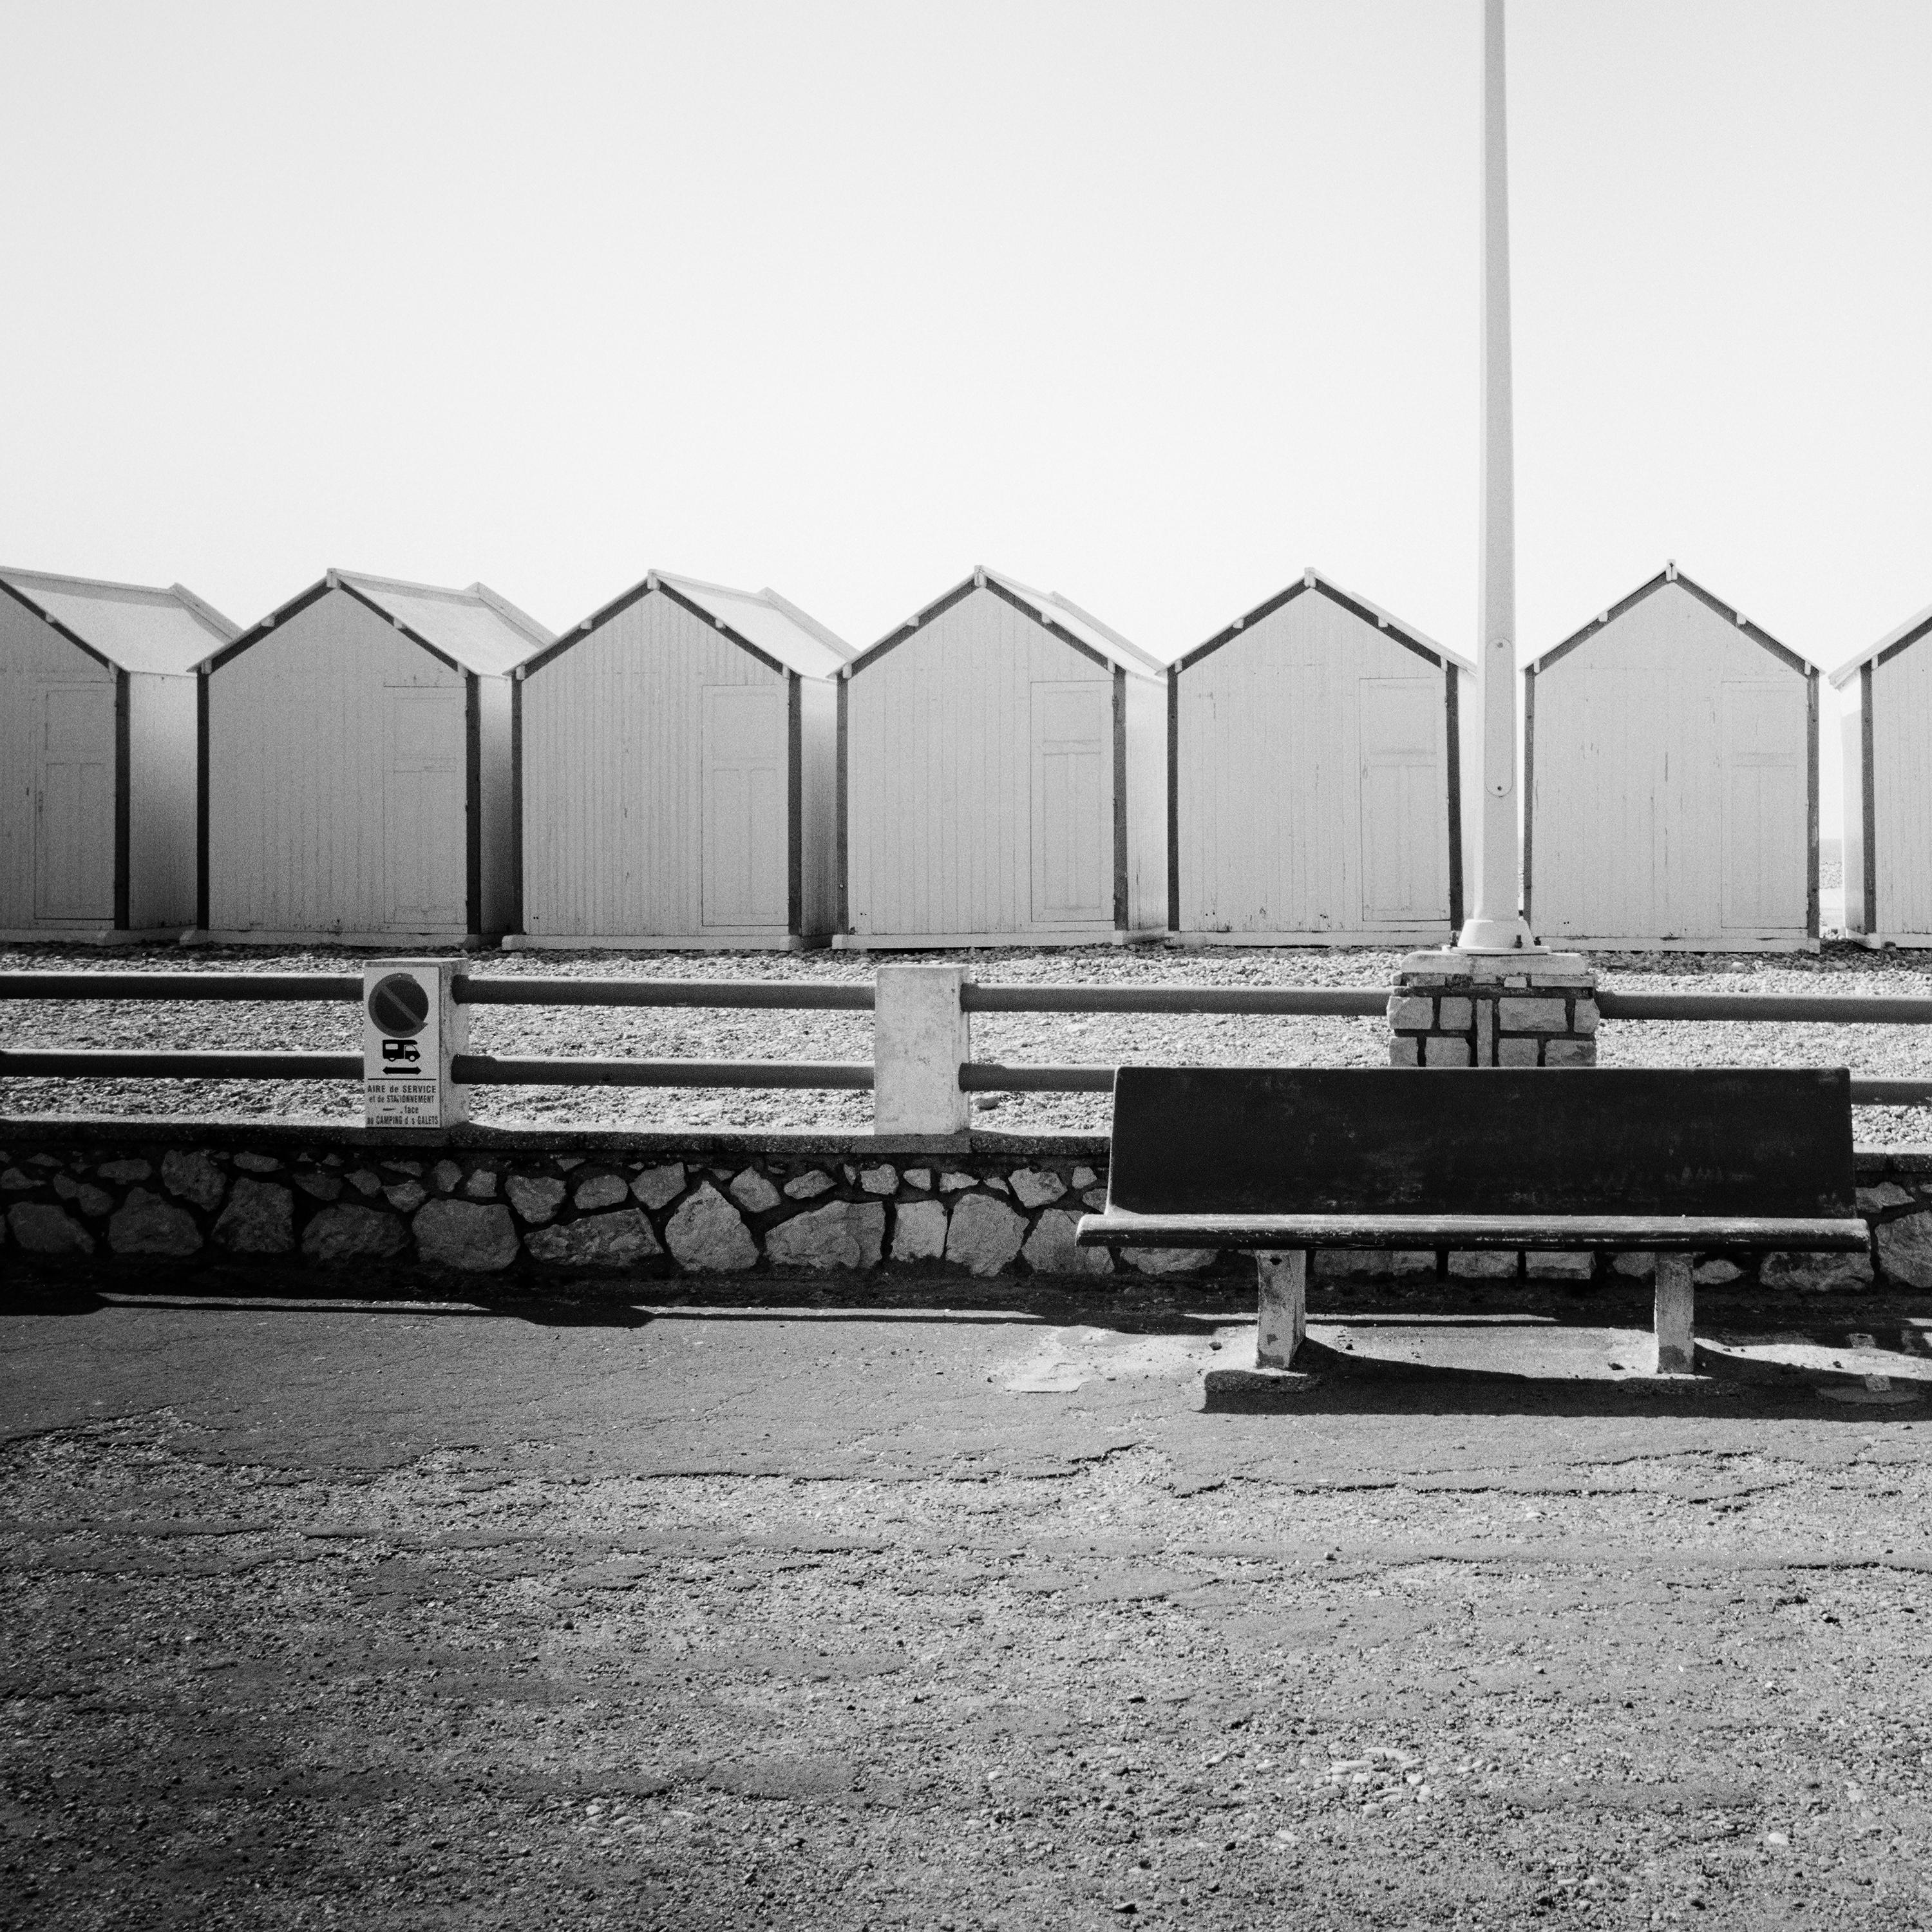 Bench on the Promenade beach huts France black white landscape art photography For Sale 3